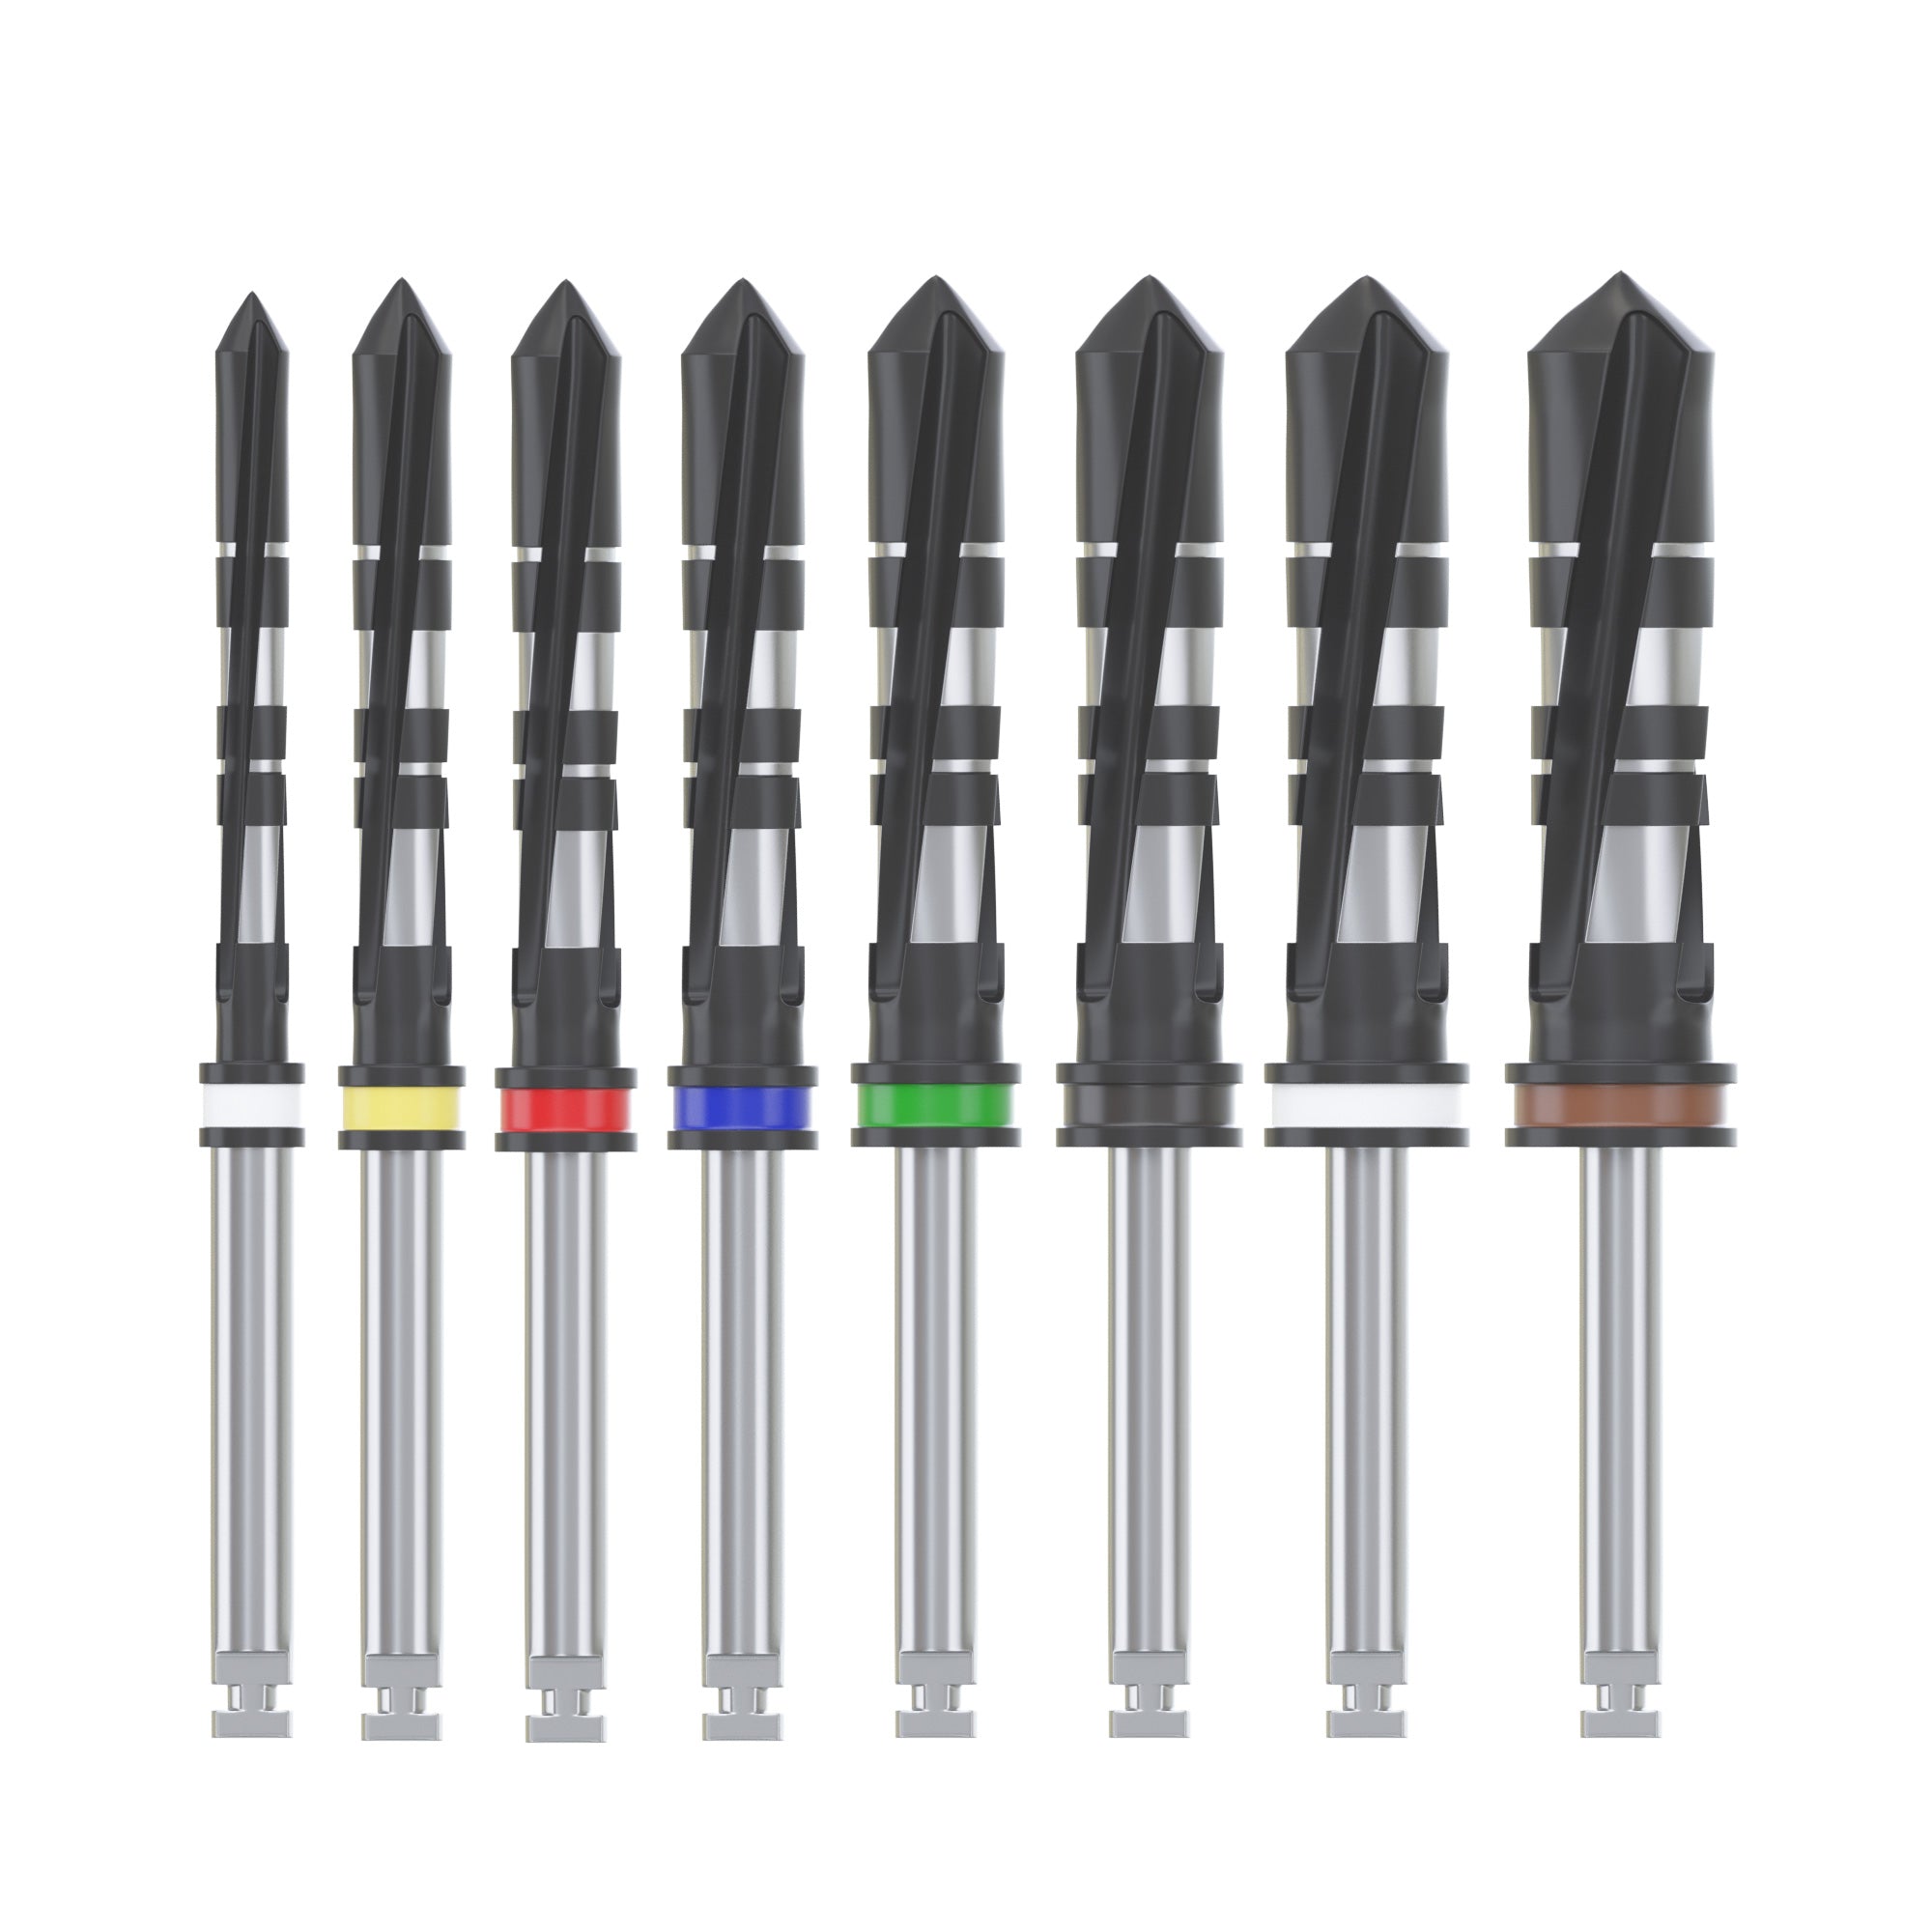 DSI Surgical Implantology Standart Cylindrical Drills With DLC Coating